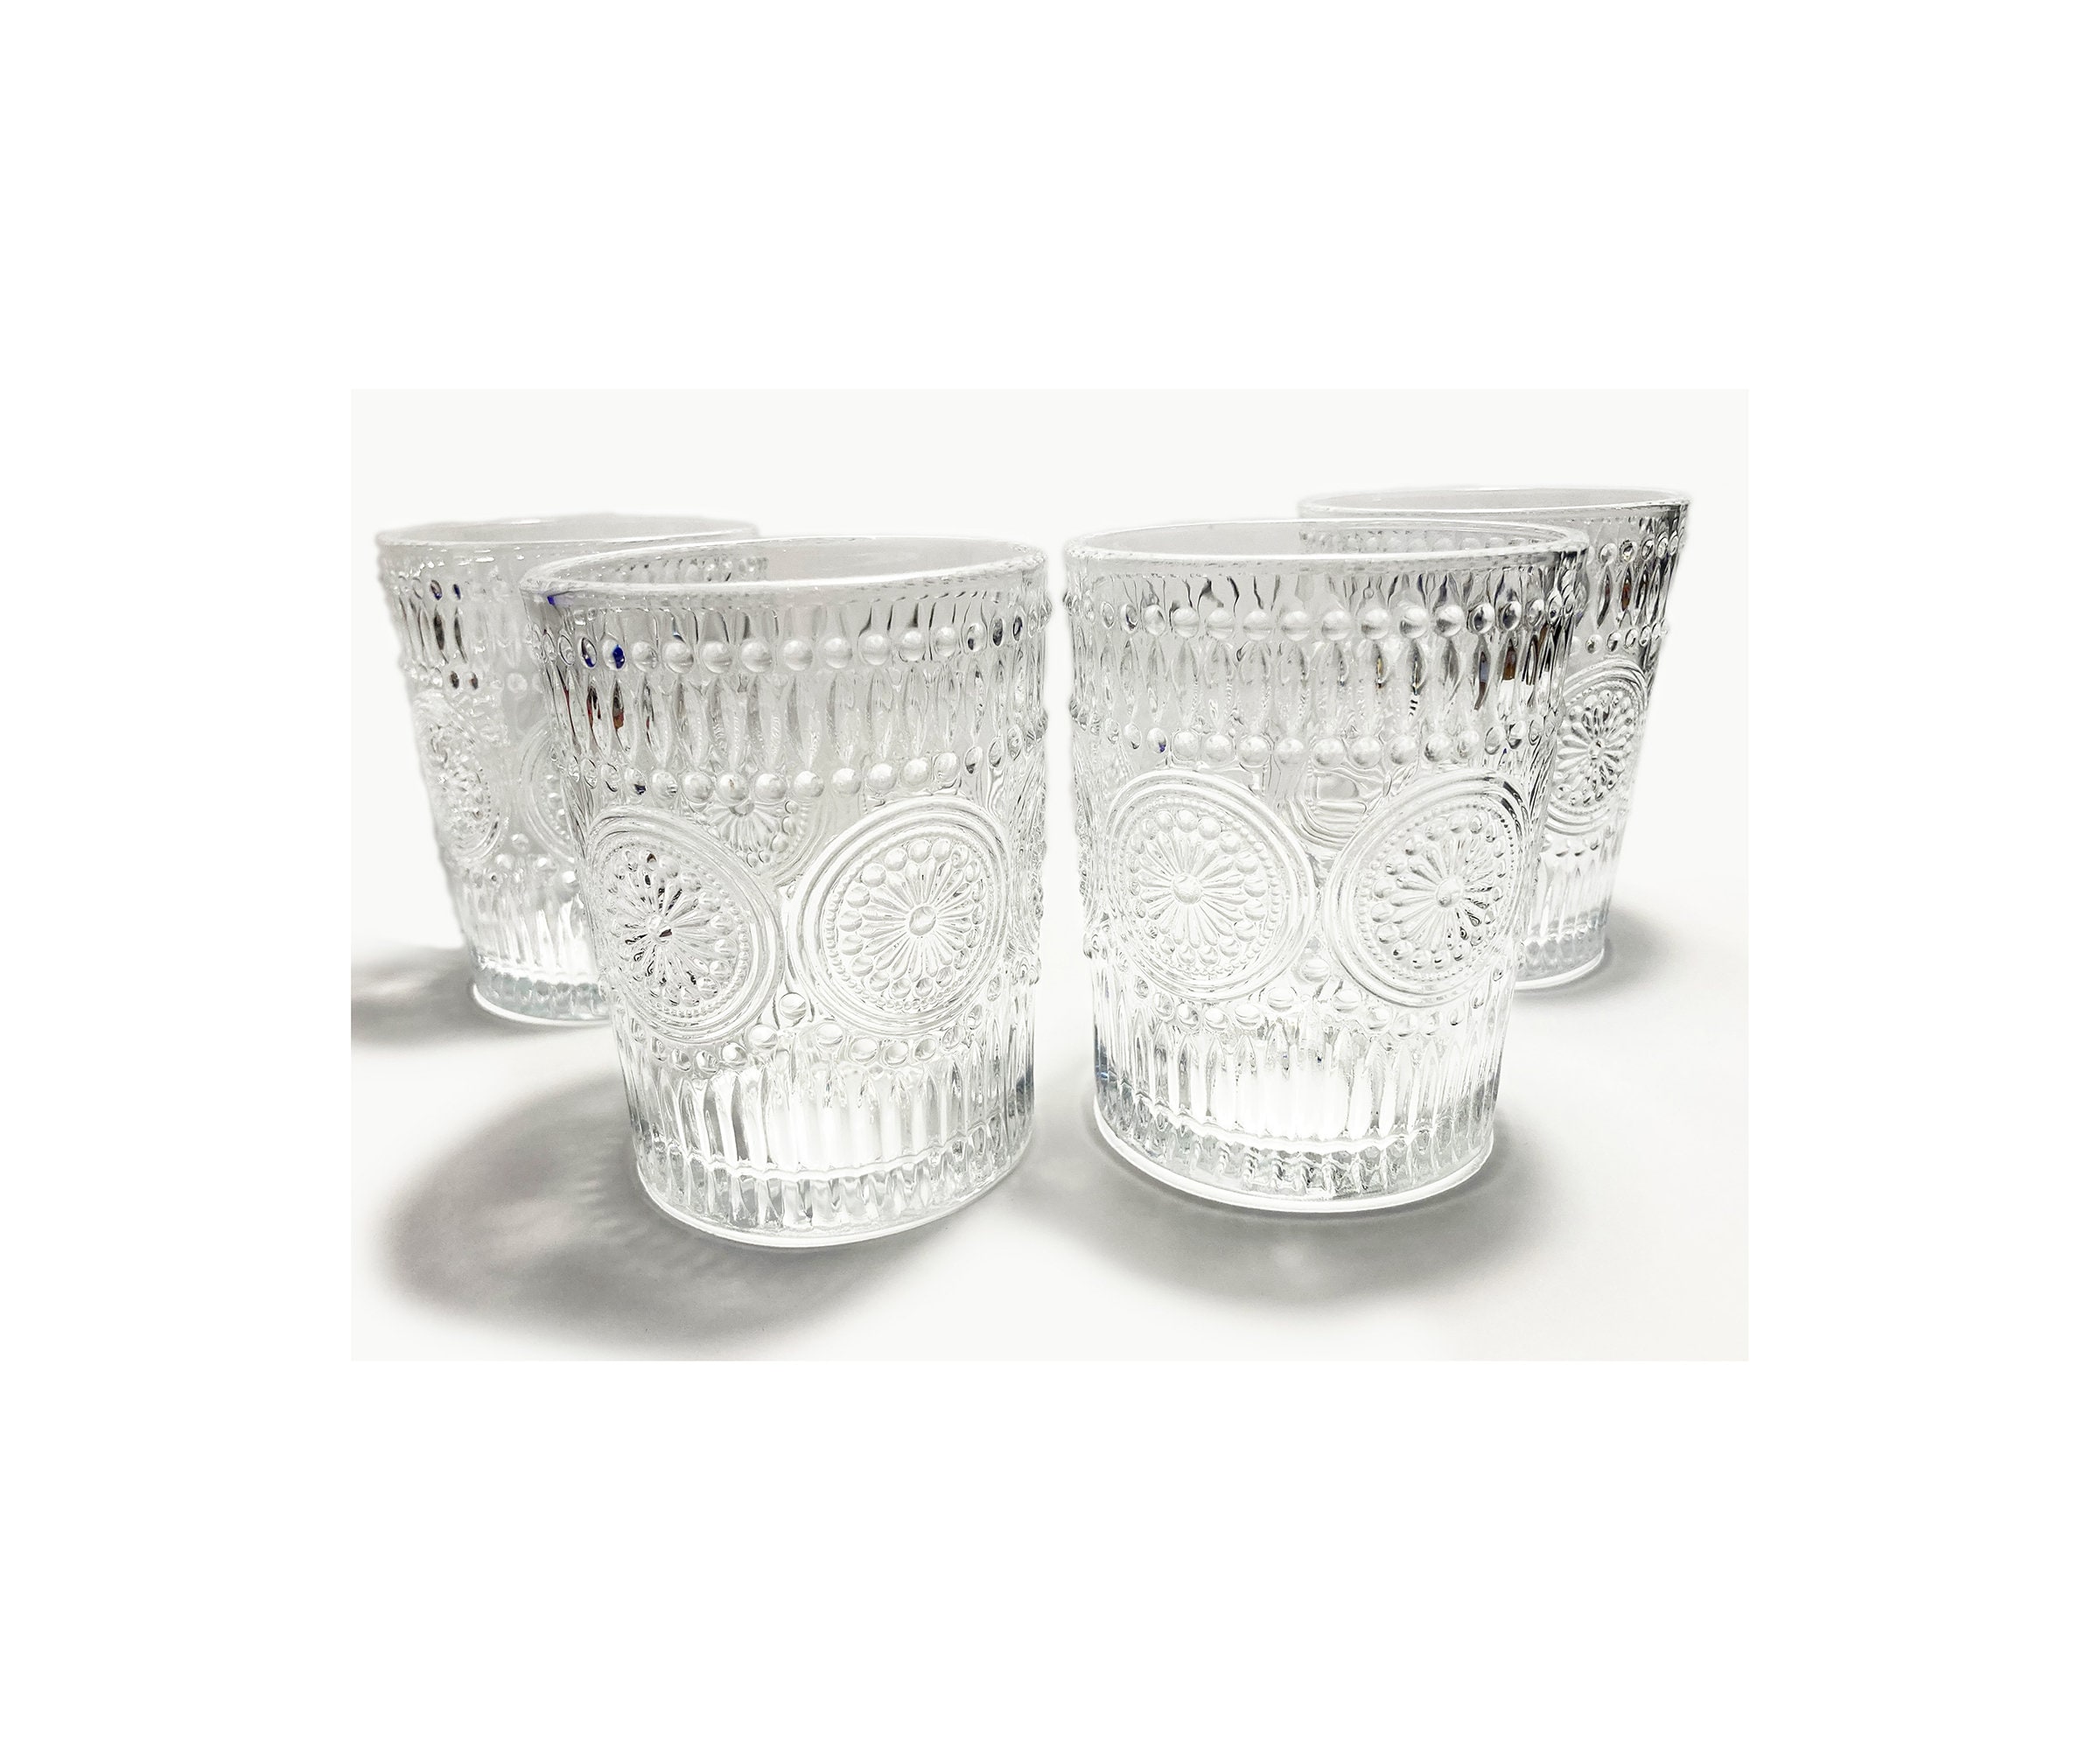 Vintage Drinking Glasses Set of 12,Embossed Romantic Water Glasses 10  Ounce,Clea